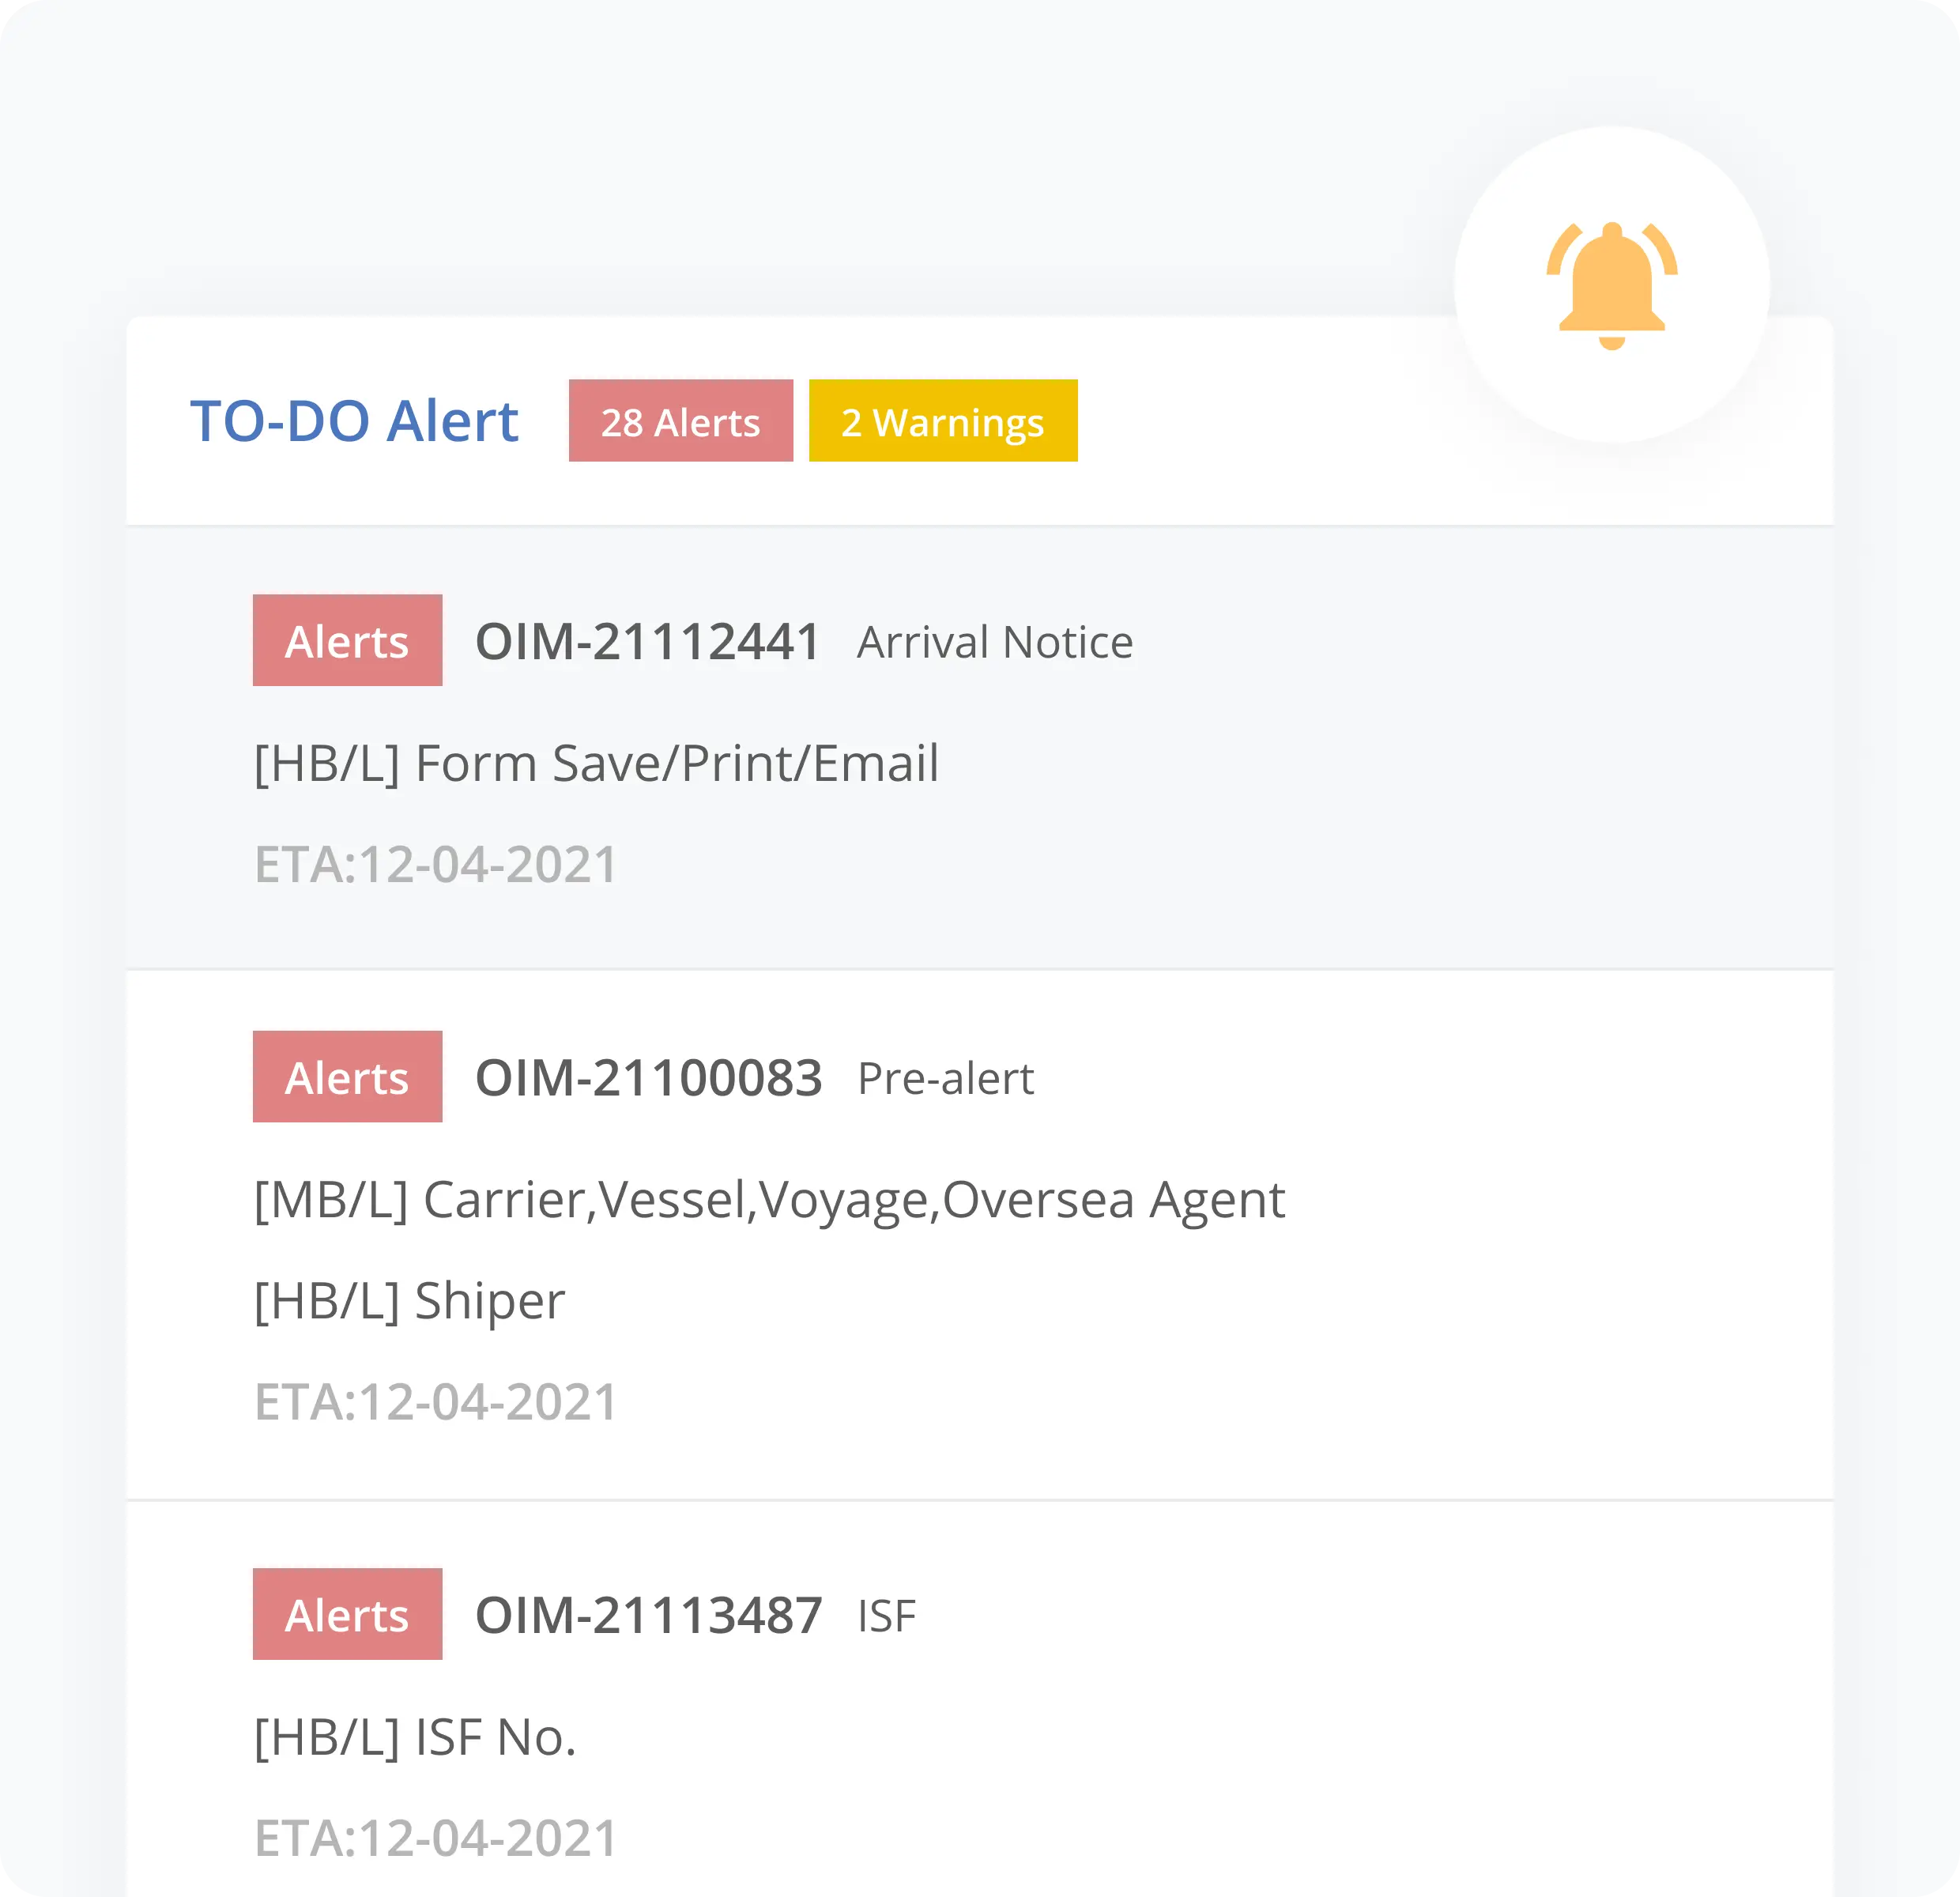 GoFreight’s To-Do Alerts, with alerts relating to arrival notices and ISF numbers.